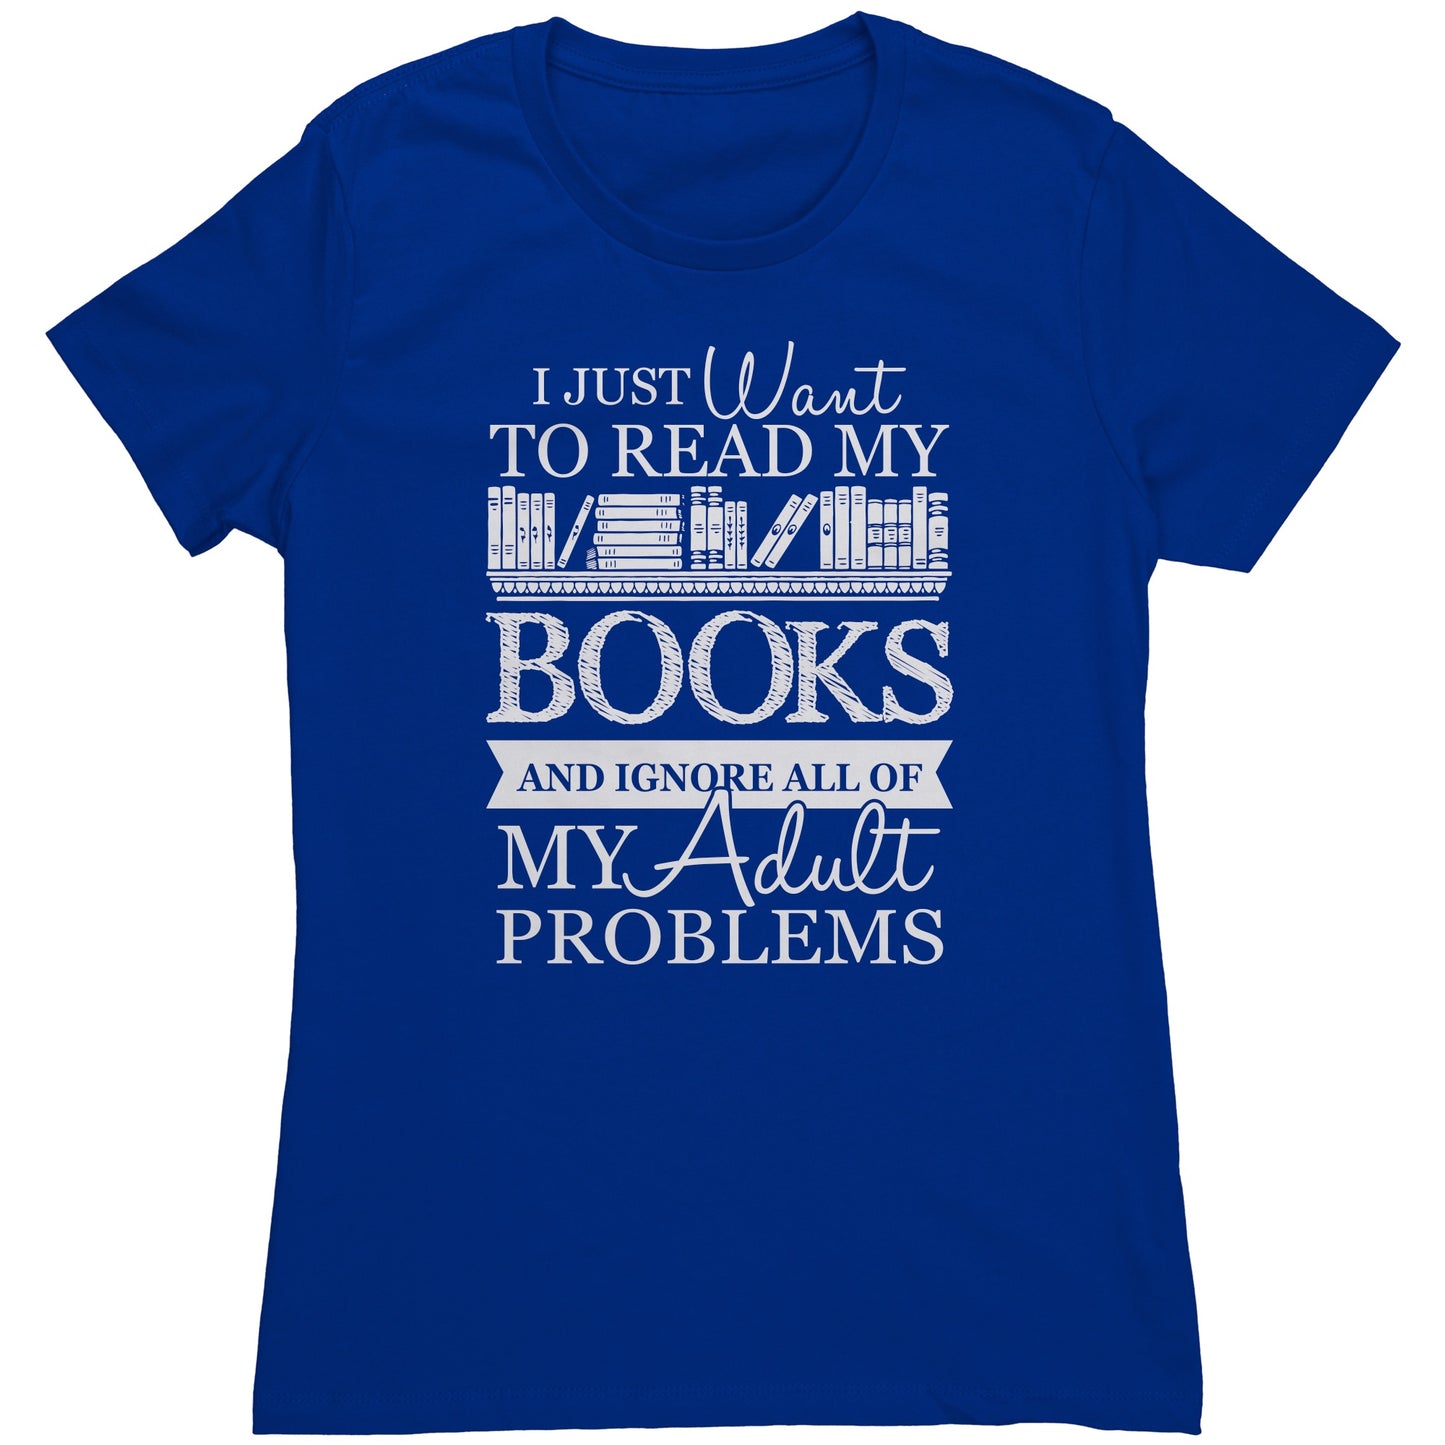 I Just Want To Read My Books And Ignore All Of My Adult Problems | Women's T-Shirt